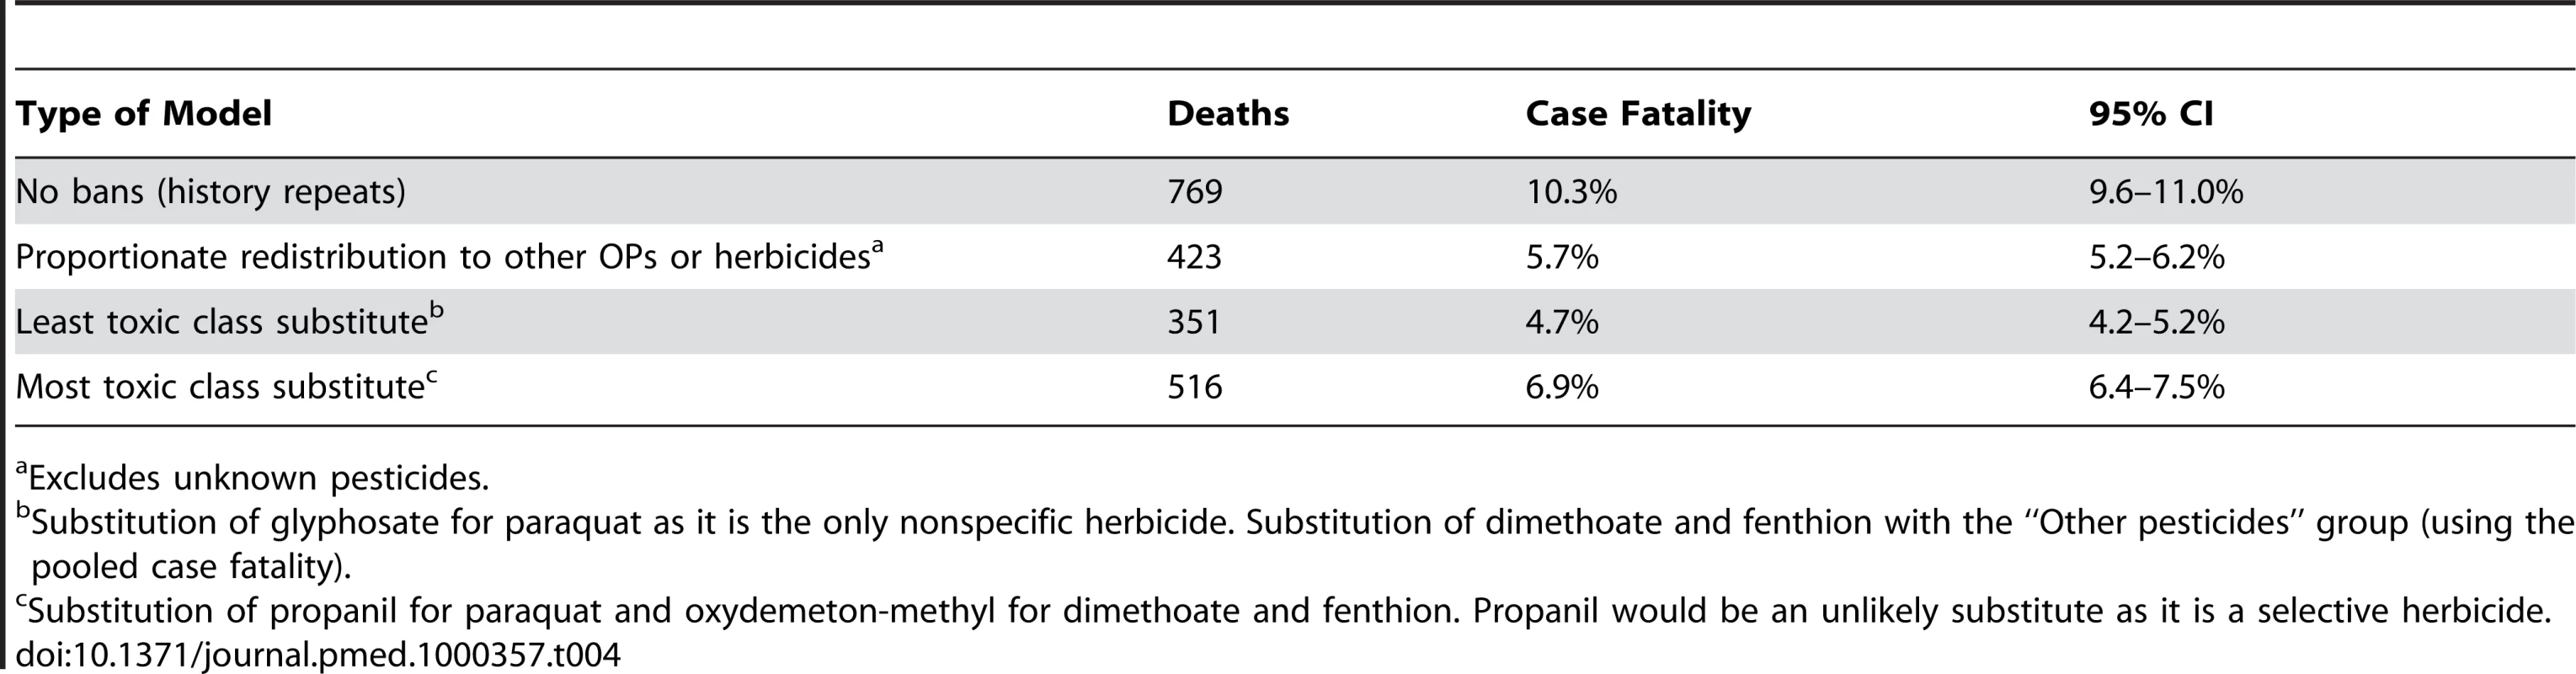 Modeling the potential effect of dimethoate, fenthion, and paraquat bans in an equal size cohort (7,461 patients with known pesticide<em class=&quot;ref&quot;>a</em> ingestion).